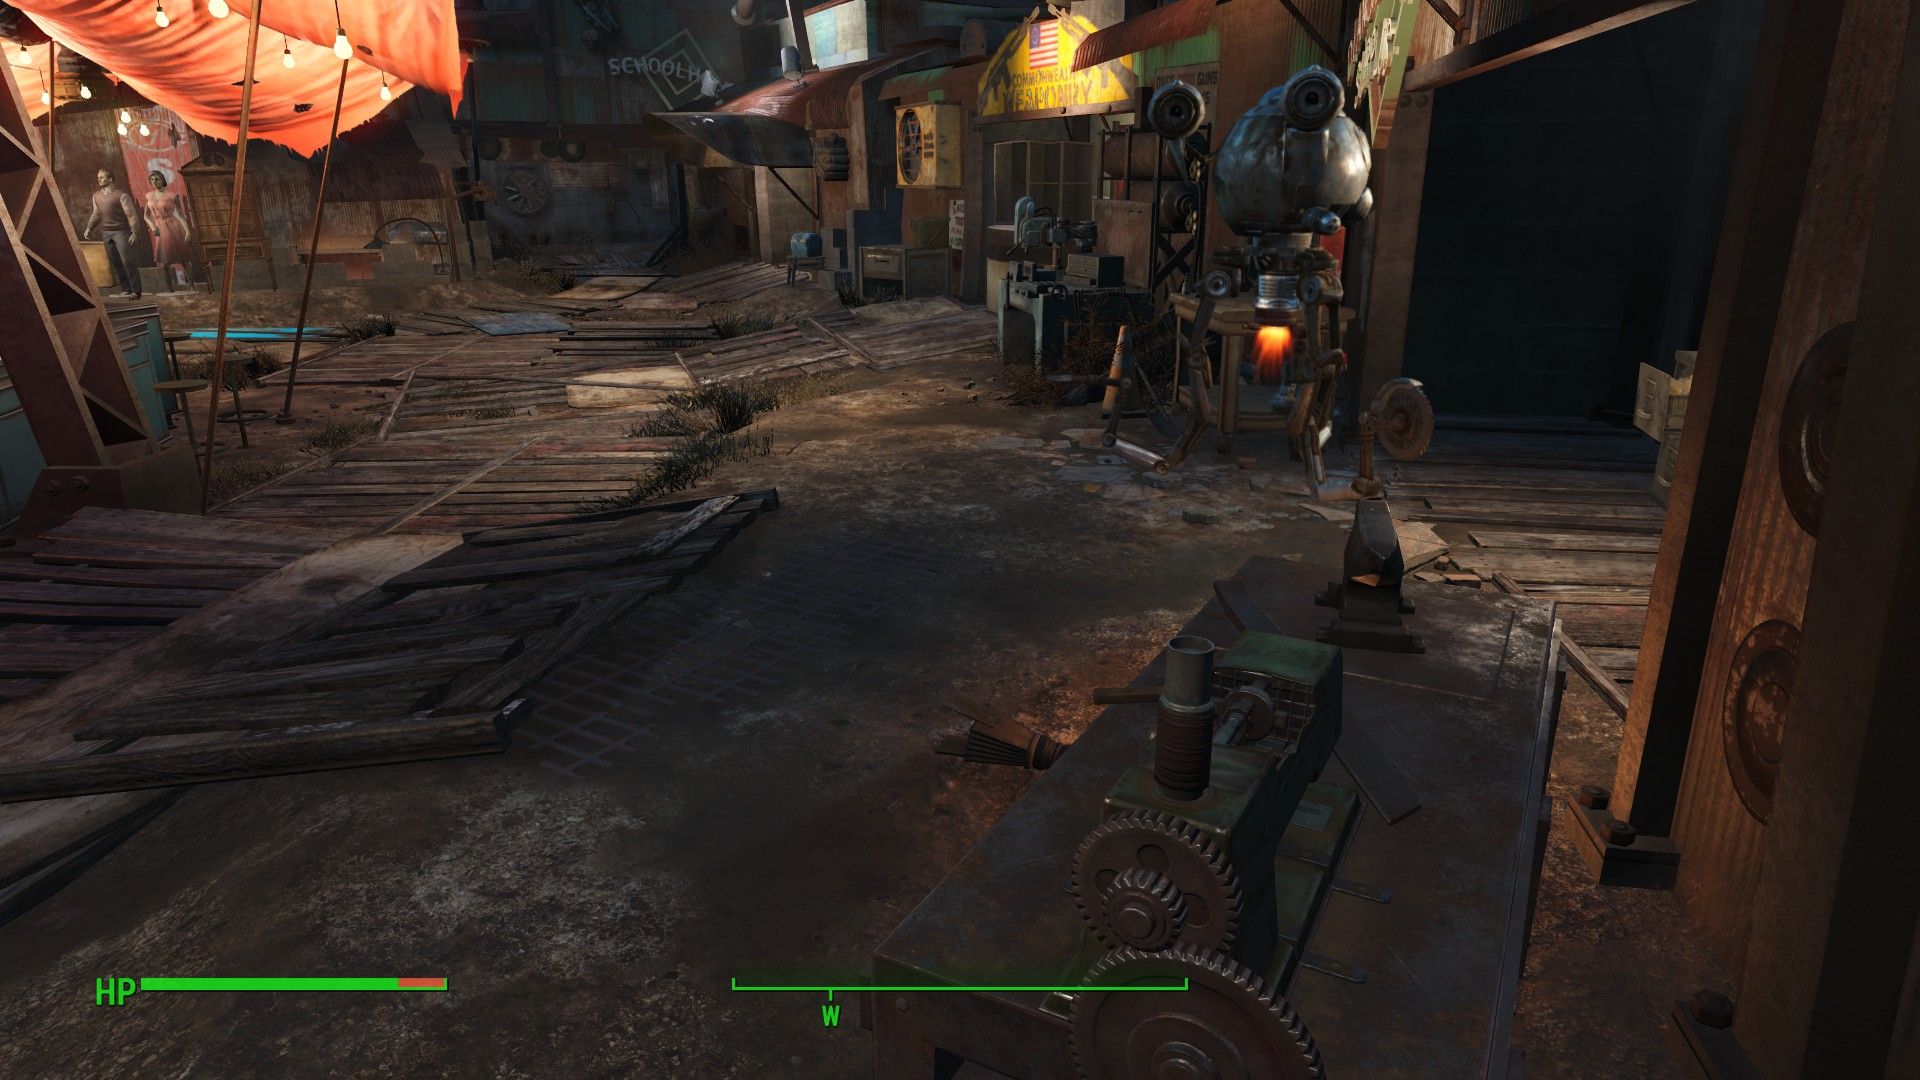 Diamond City HomePlate. Player Home Survival Build. (No Mods Just